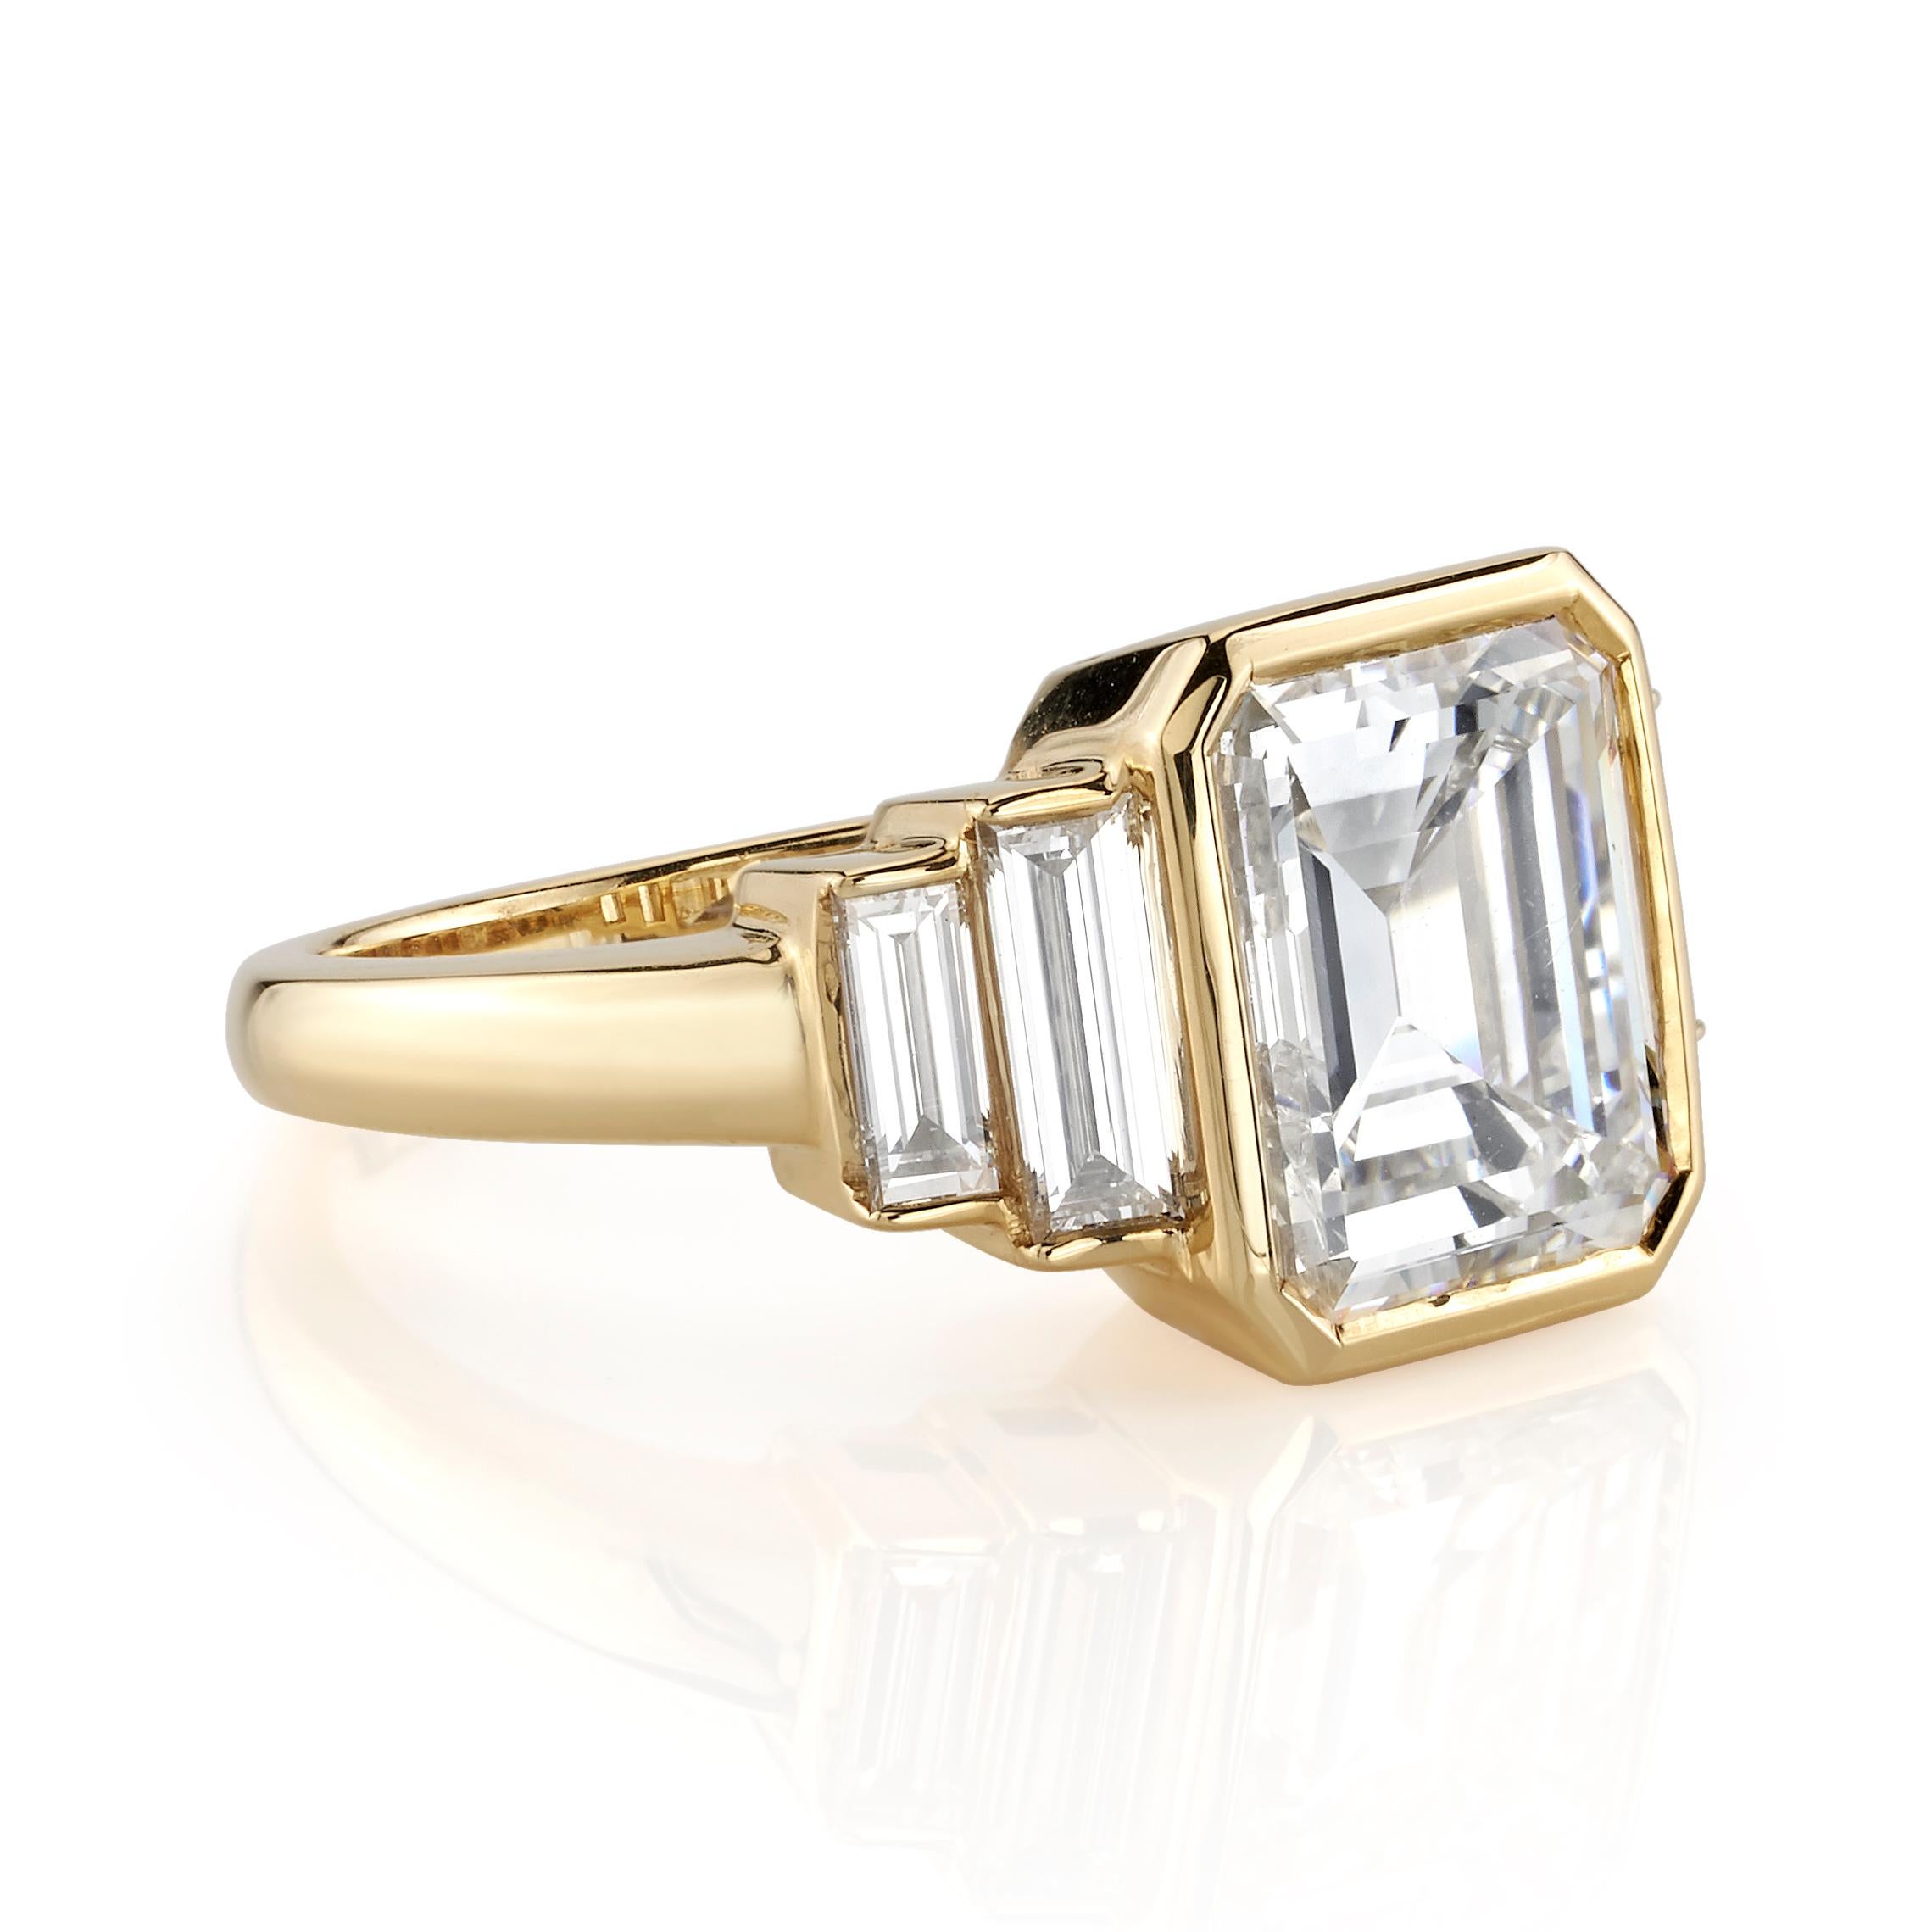 3.34ct F/VS1 GIA certified Emerald cut diamond with 0.71ctw baguette accents set in a handcrafted 18K yellow gold mounting. Ring is currently a size 6 and can be sized to fit.